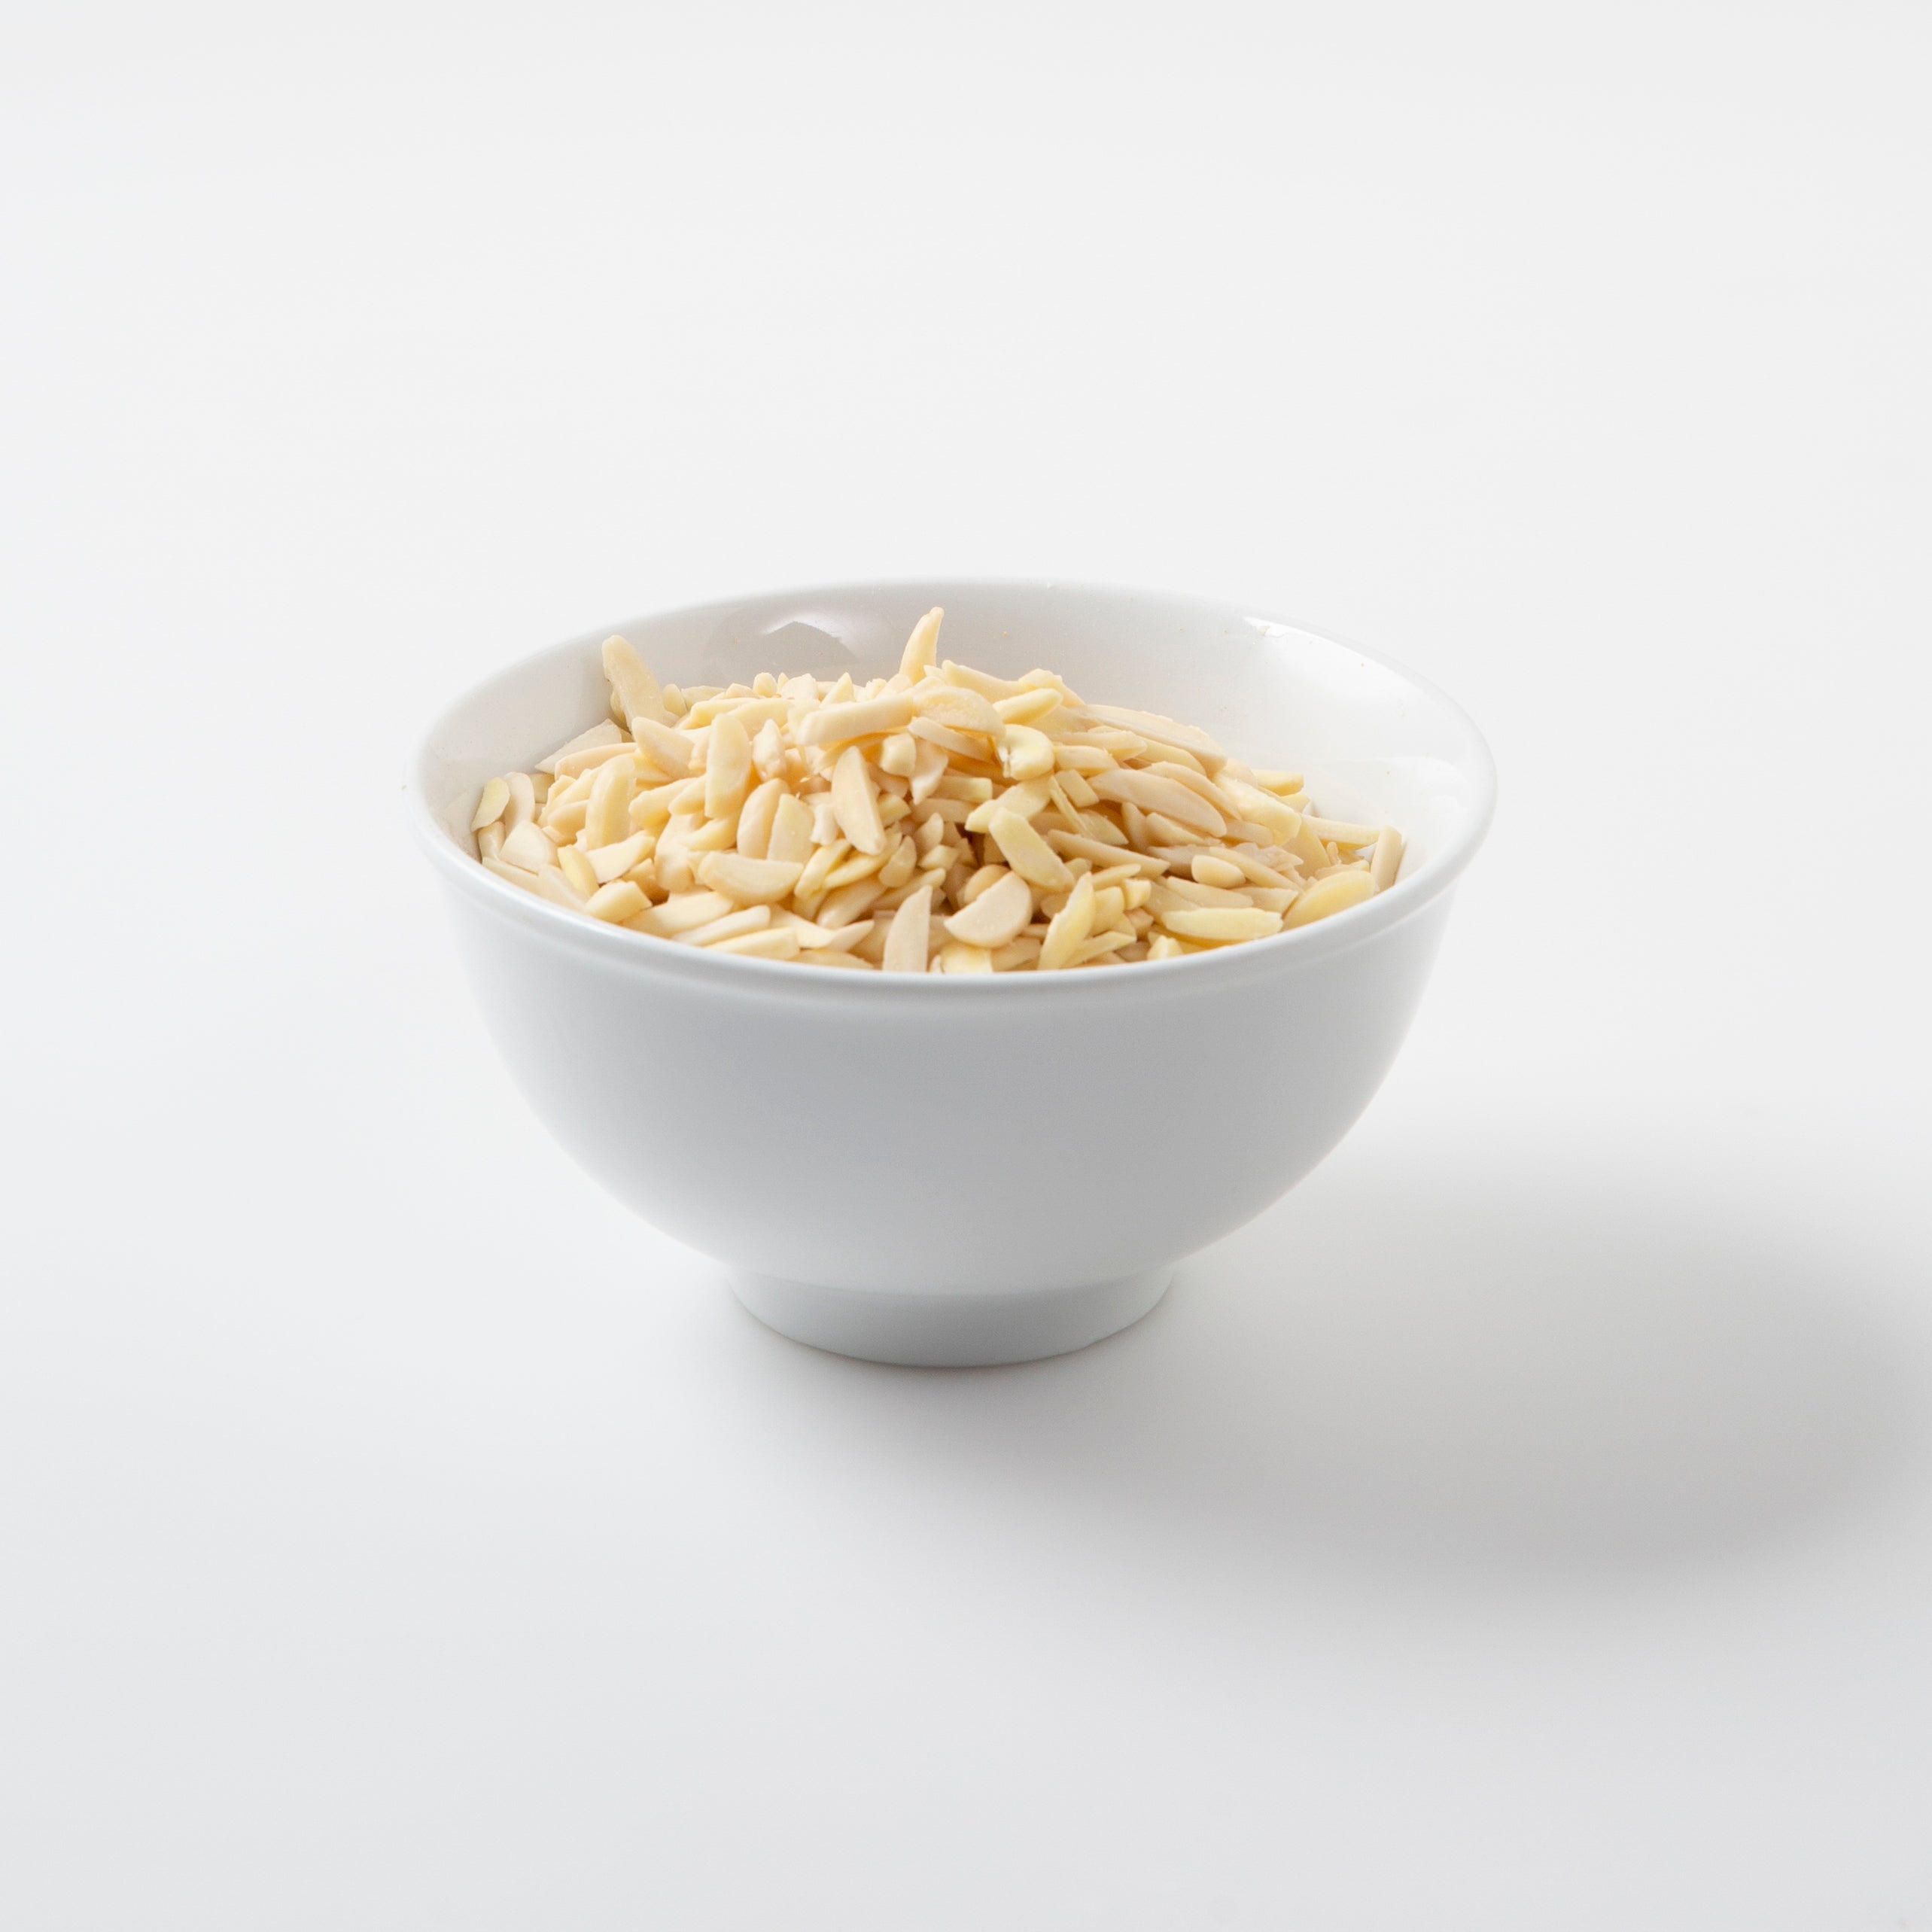 Blanched Slivered Almonds (Raw Nuts) in white bowl - Naked Foods